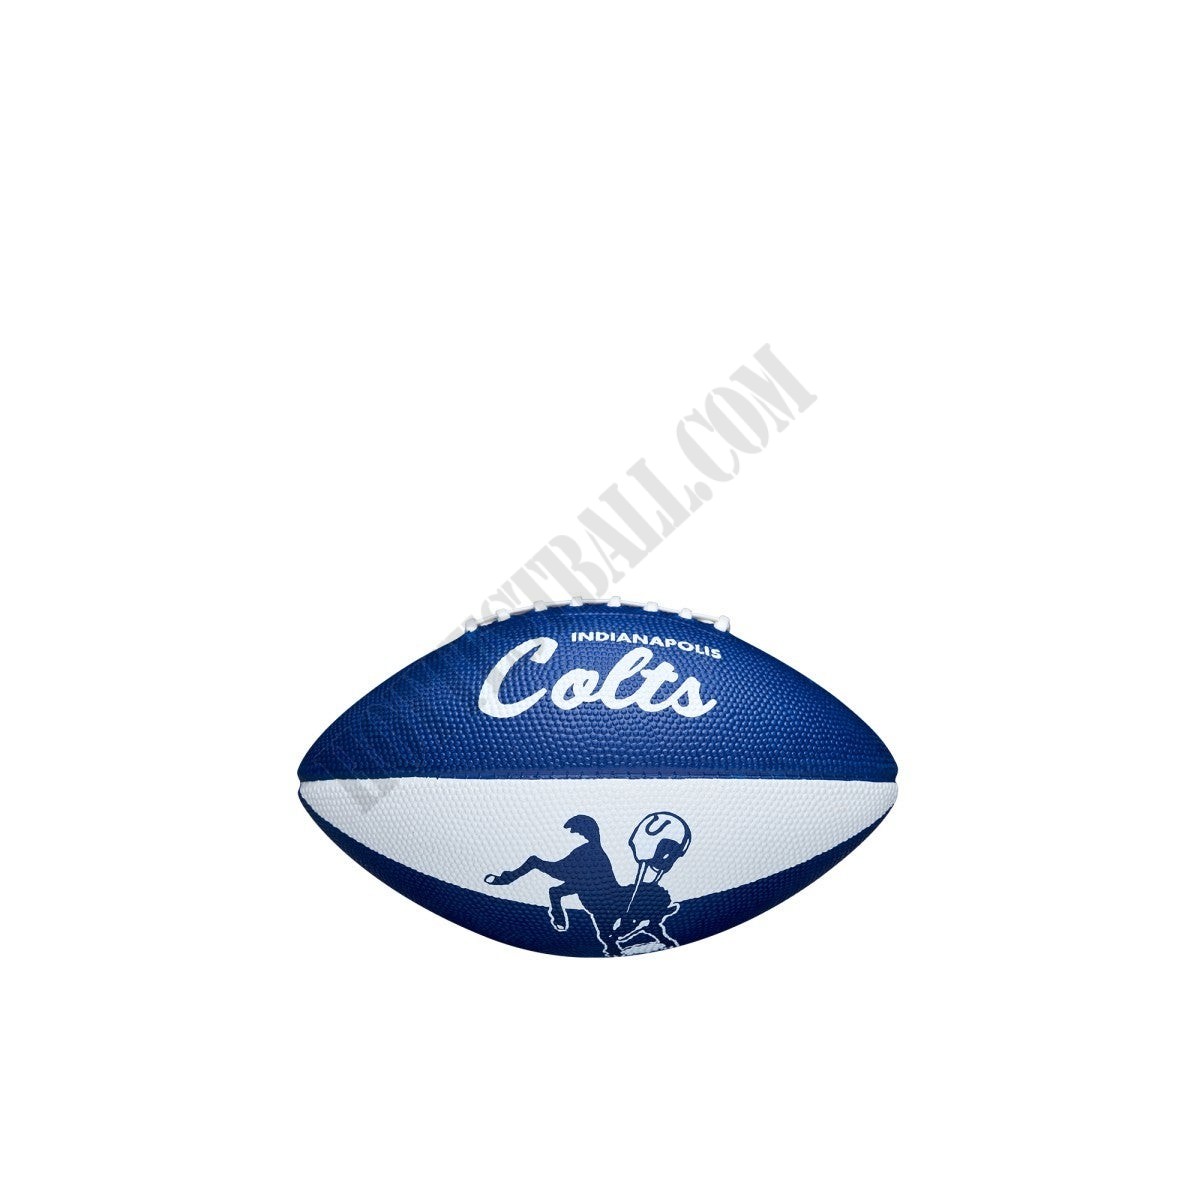 NFL Retro Mini Football - Indianapolis Colts ● Wilson Promotions - -4